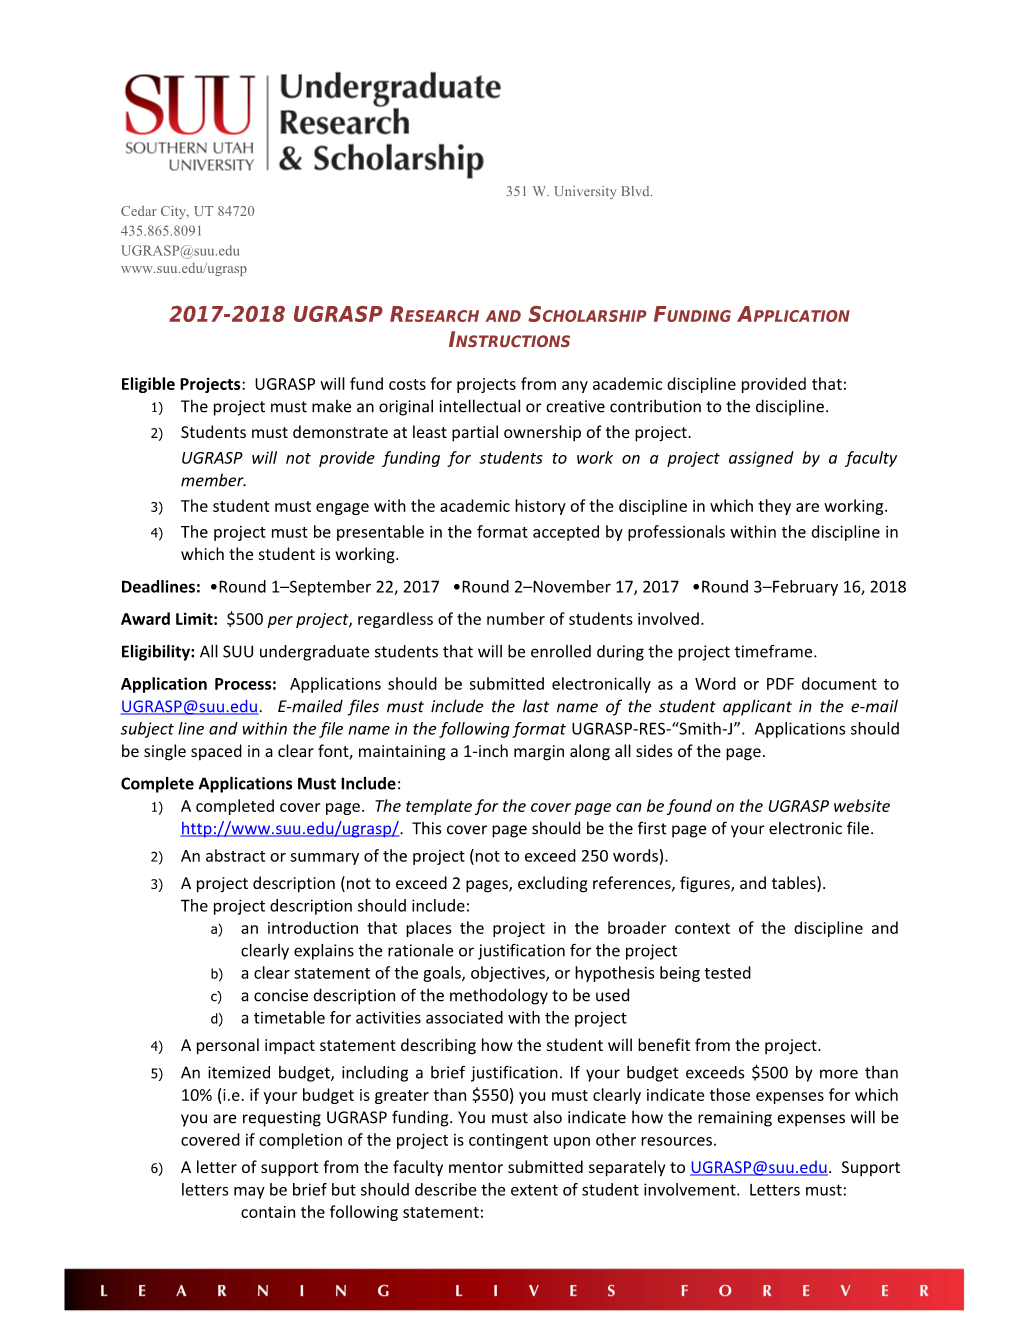 2017-2018 UGRASP Research and Scholarship Funding Application Instructions